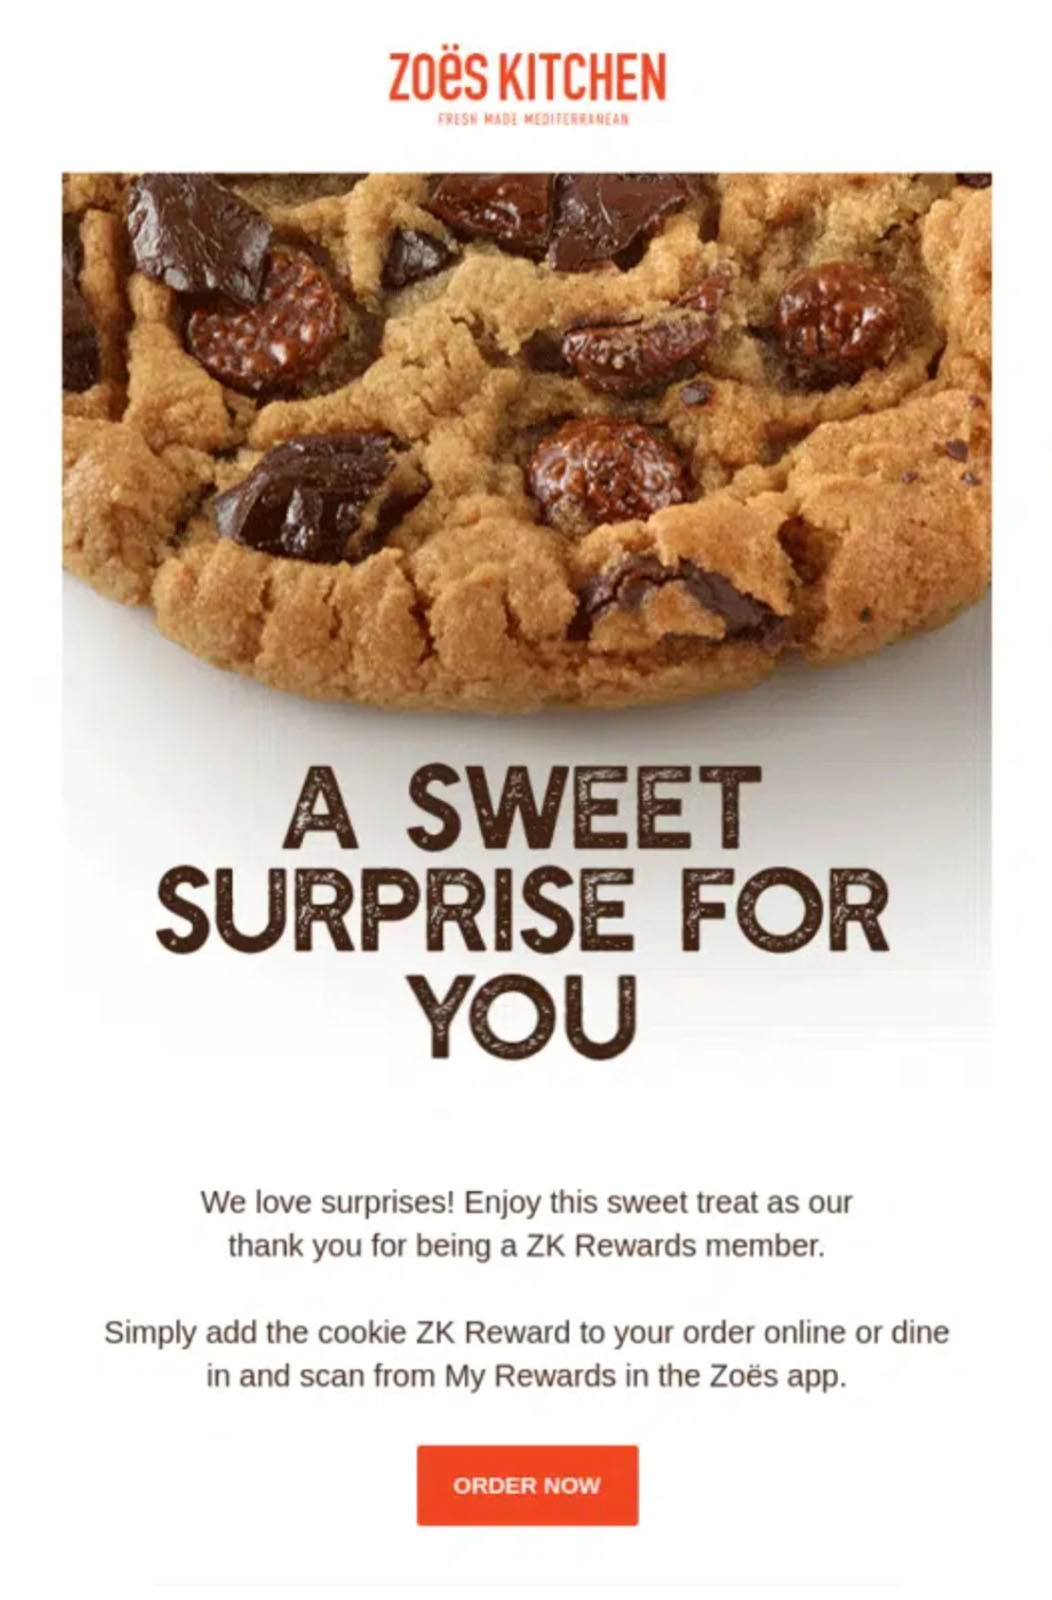 Email marketing letter offering a free cookie with purchase.